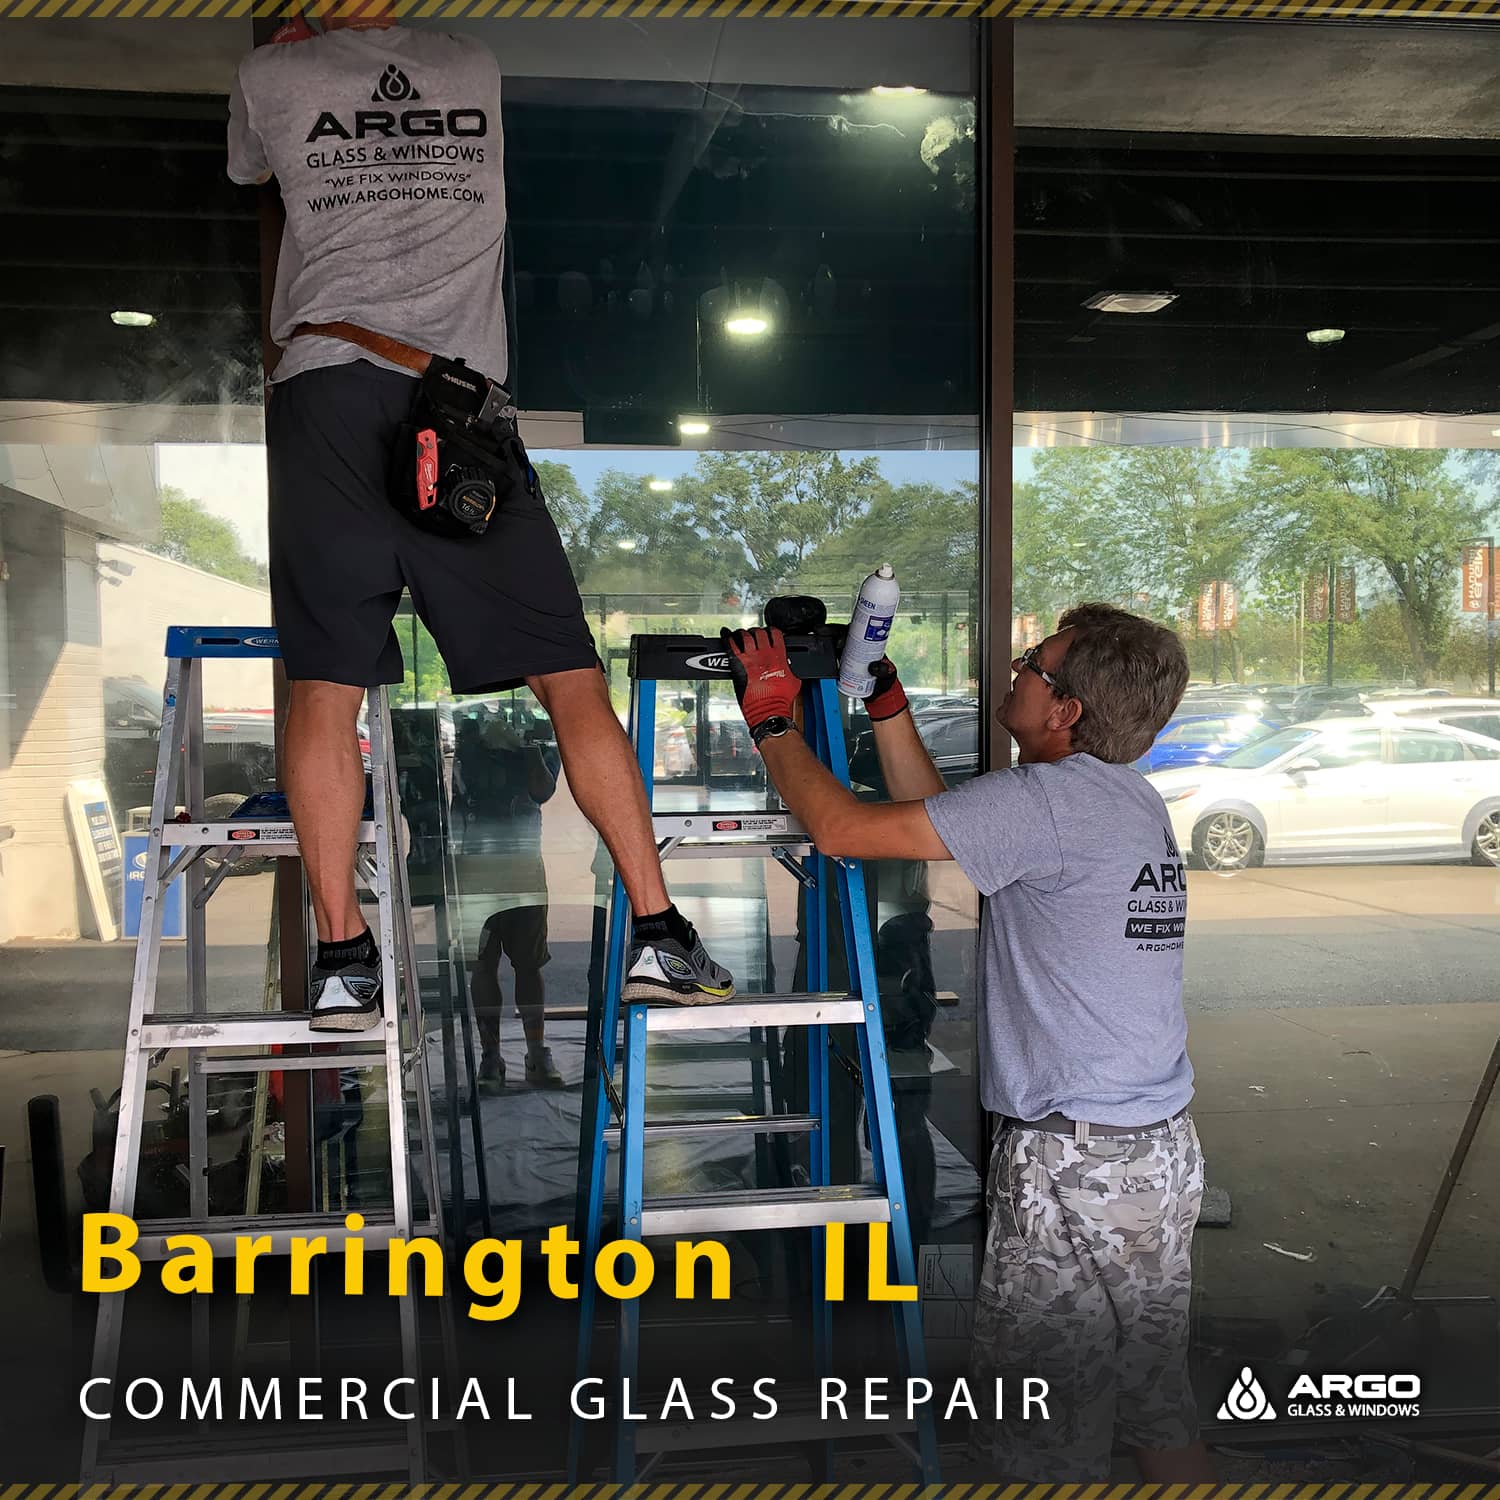 Professional Commercial Glass Repair company